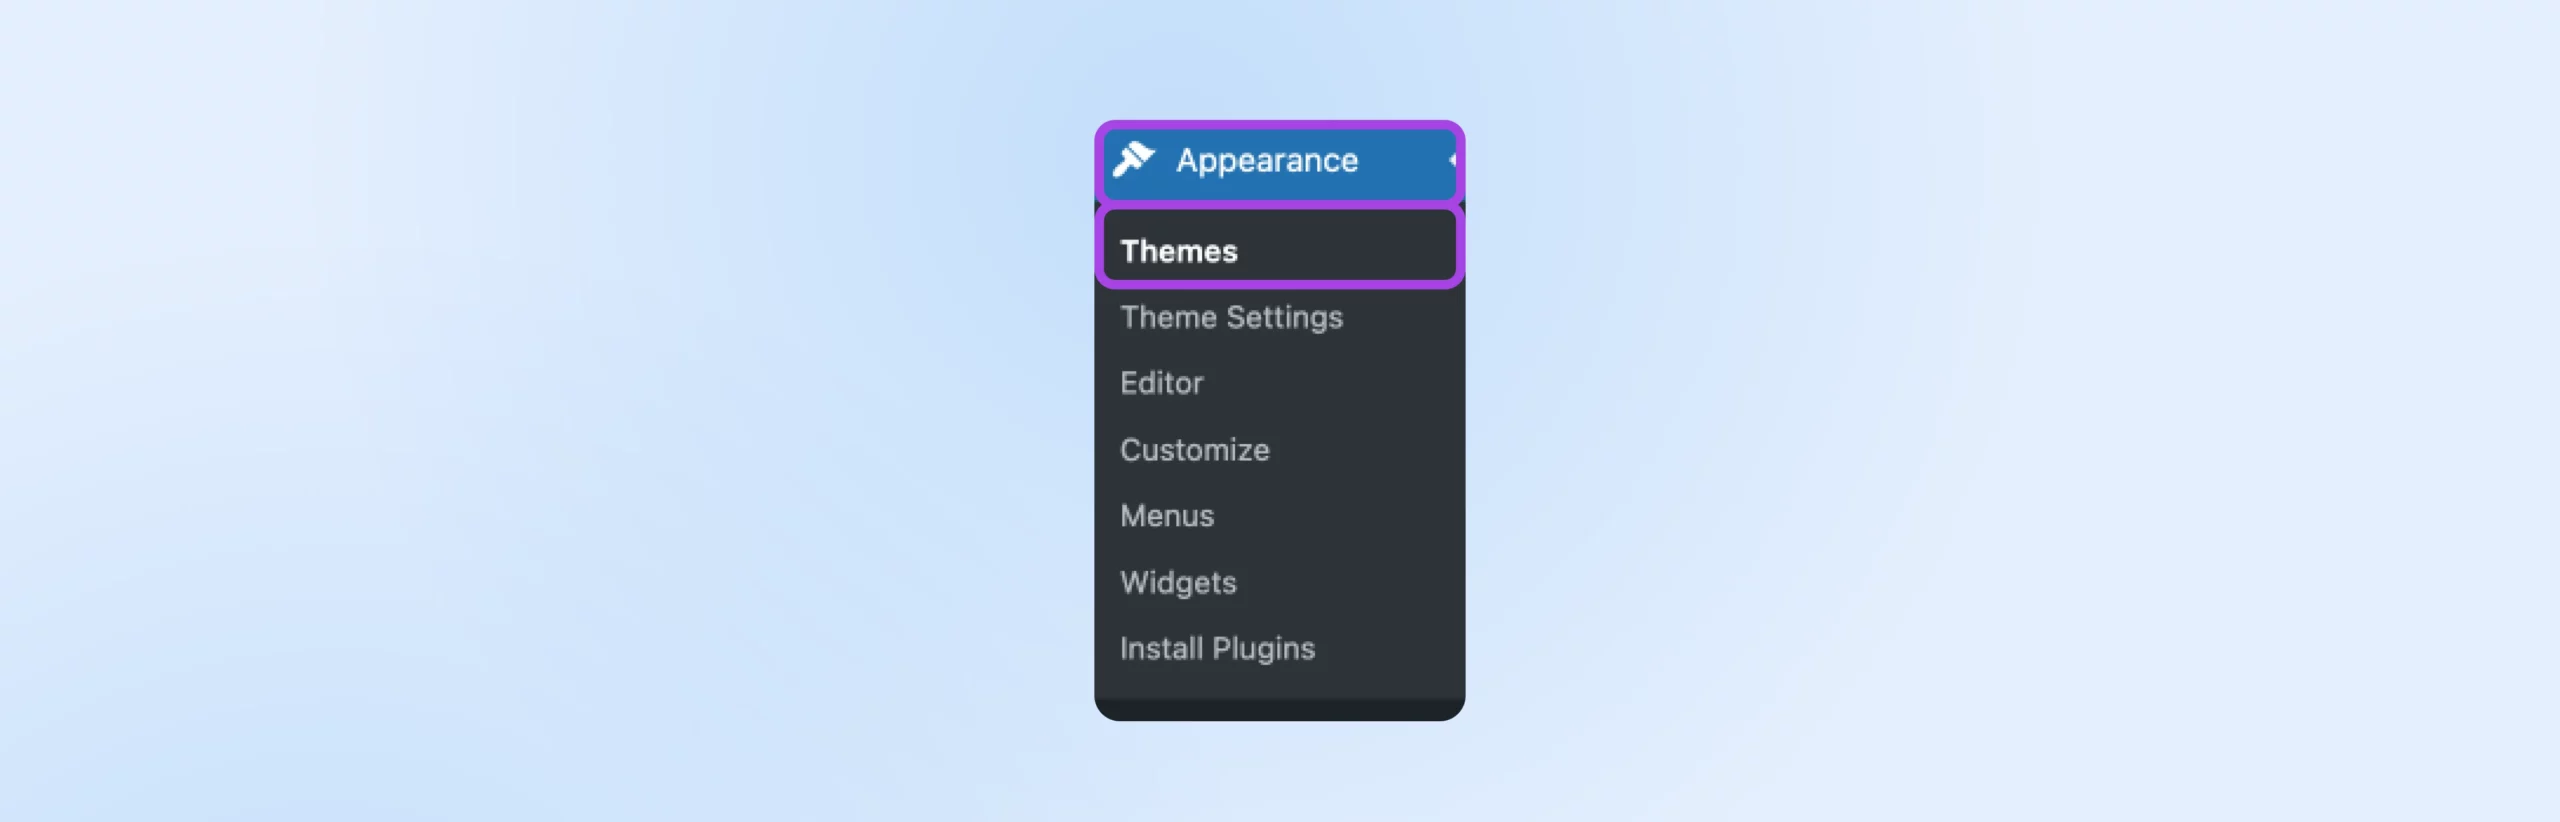 WordPress dialog drop-down menu for "Appearance" and "Themes" selected. 